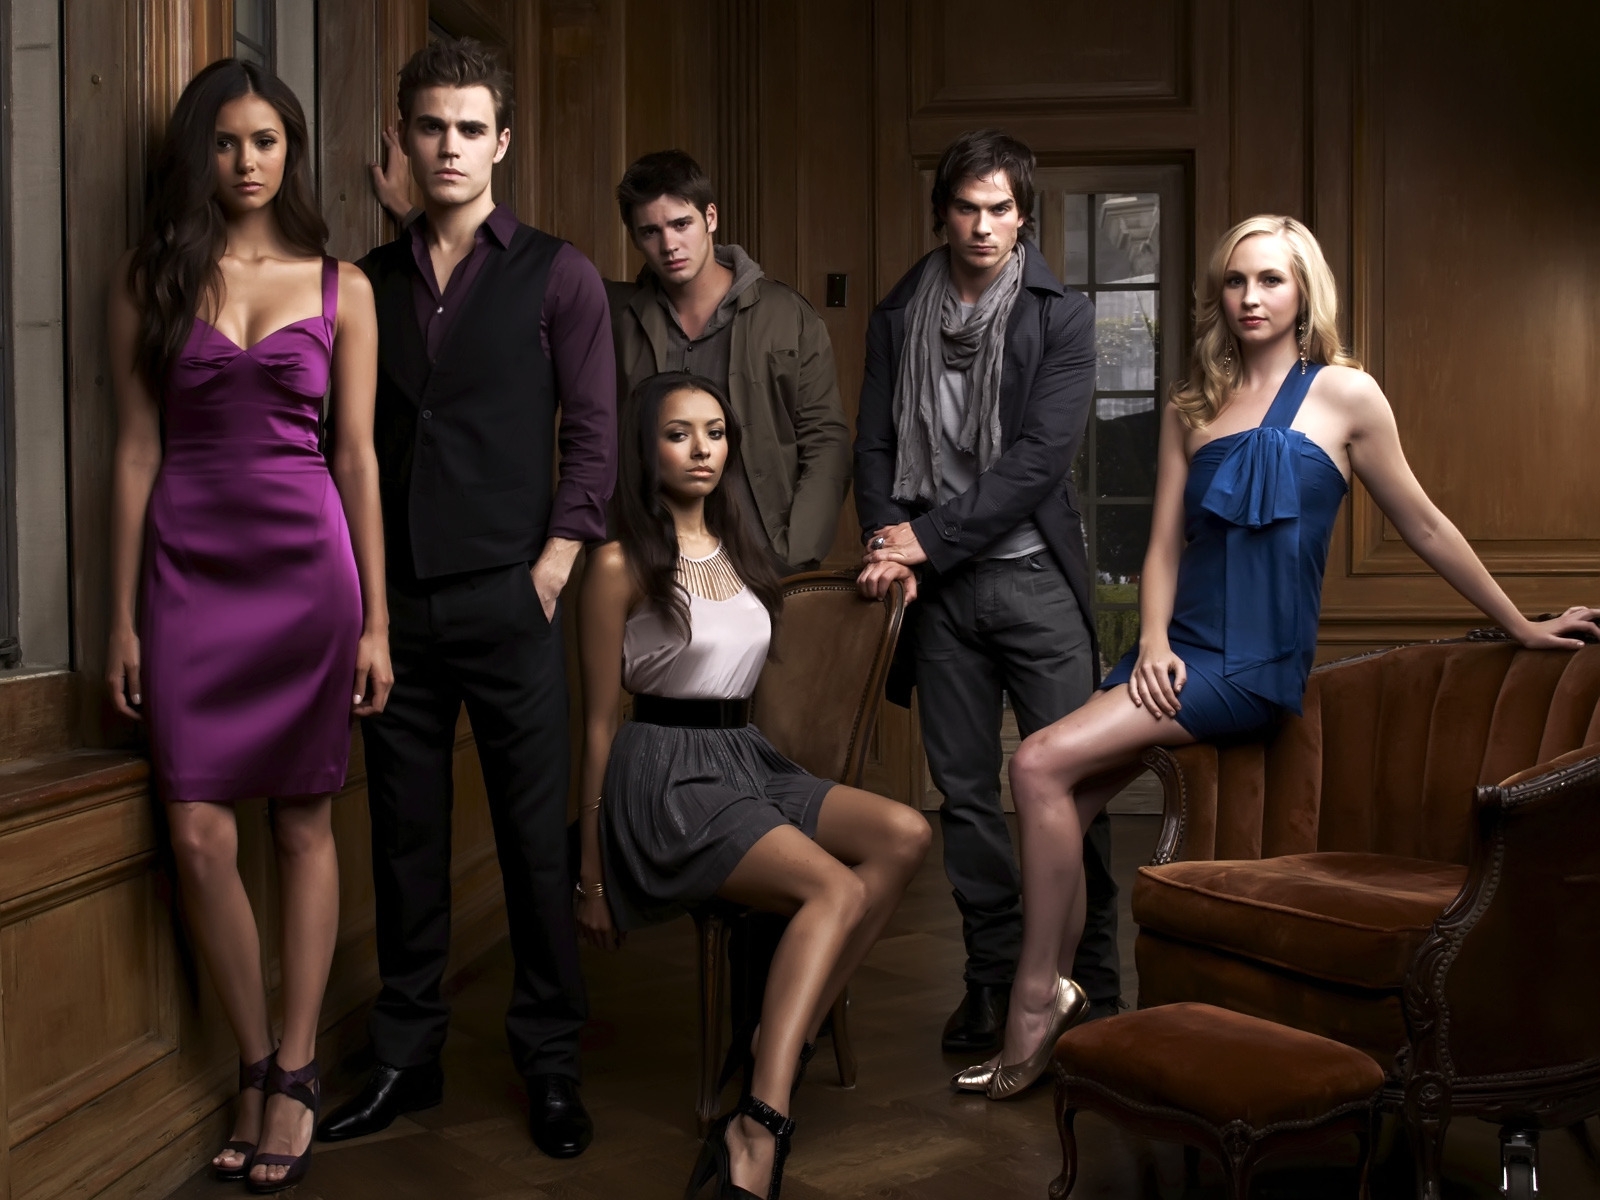 The Vampire Diaries Cast for 1600 x 1200 resolution